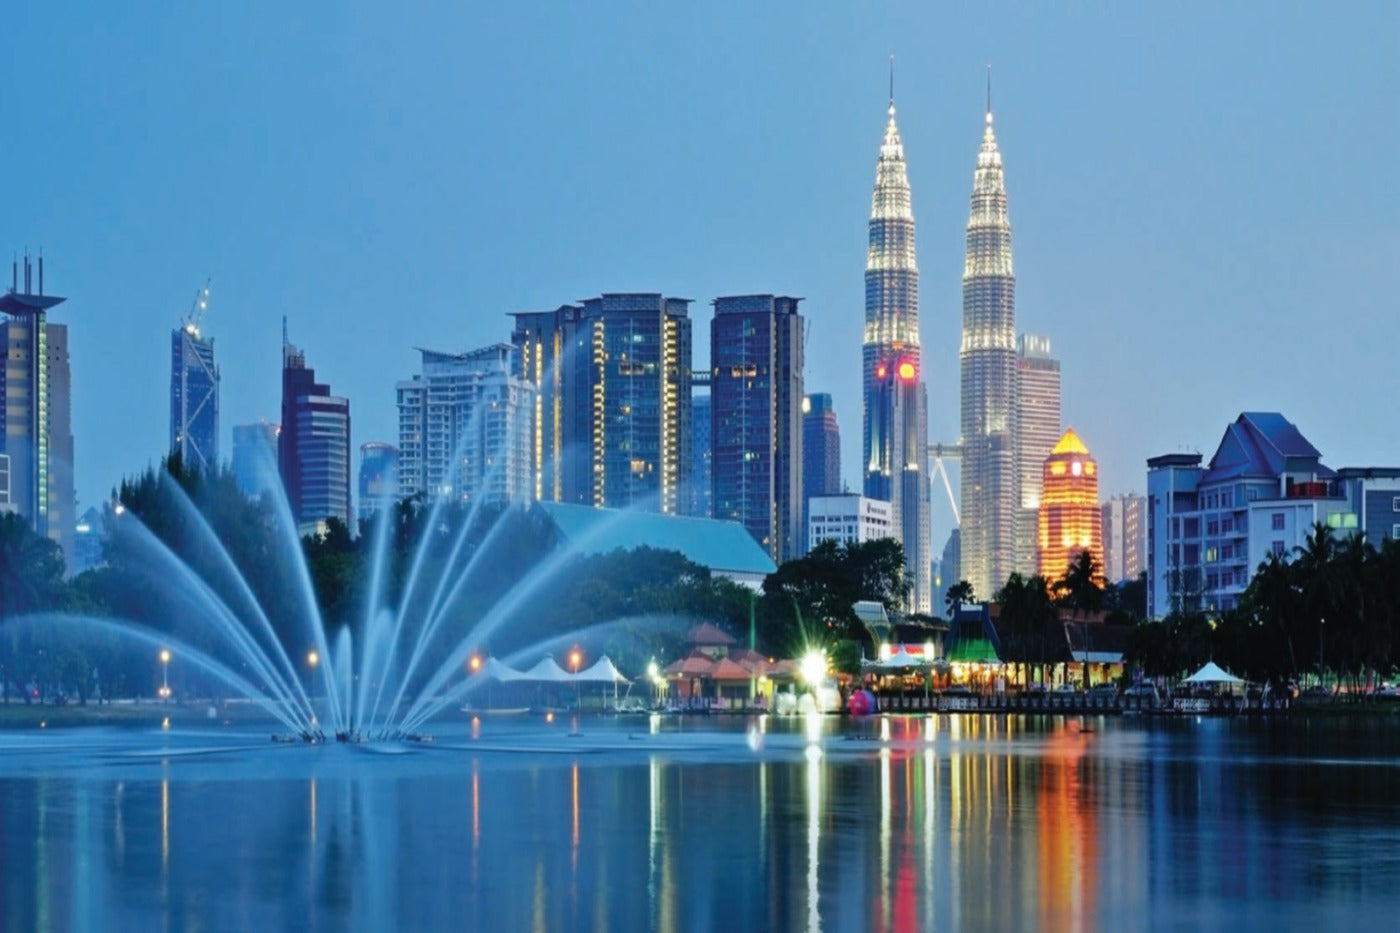 Letter of Recommendation - Malayasia